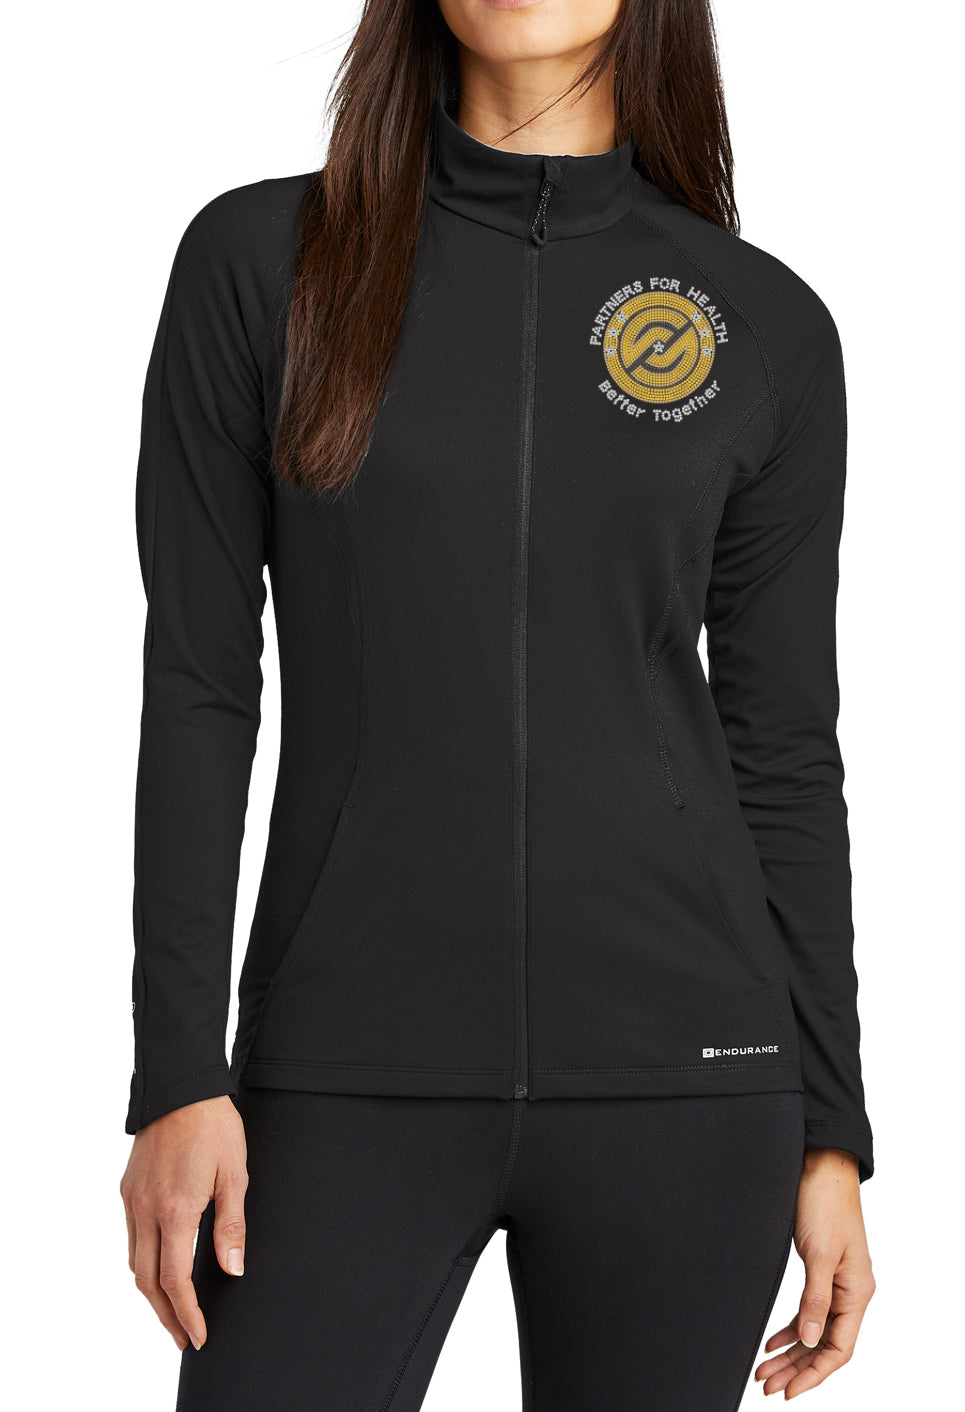 Partners For Health | Bev Vance Level Up Collection | BLING Women's Performance Full Zip